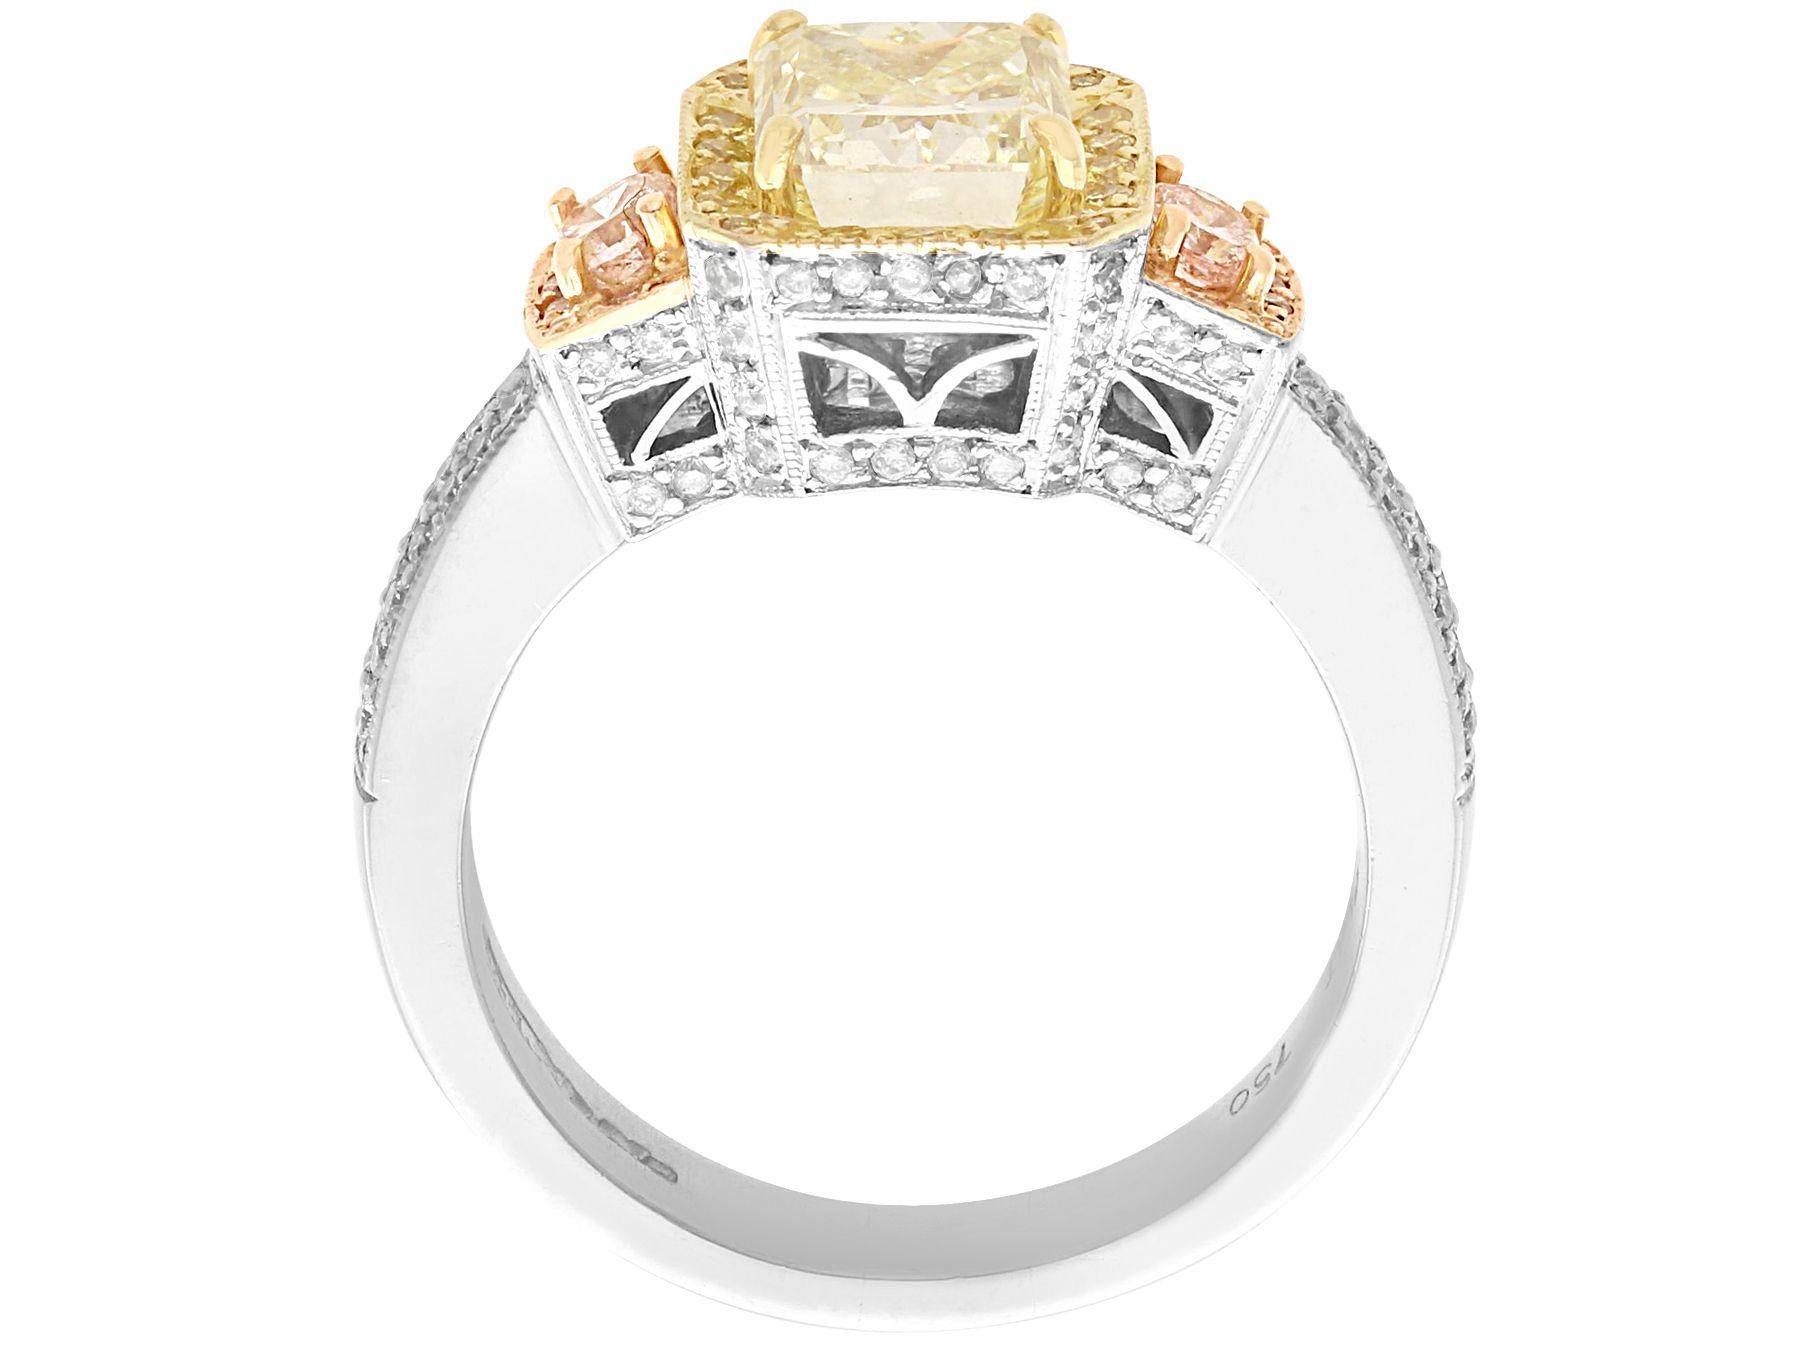 Women's or Men's 3.06 Carat Yellow and Pink Diamond Engagement Ring in Platinum For Sale